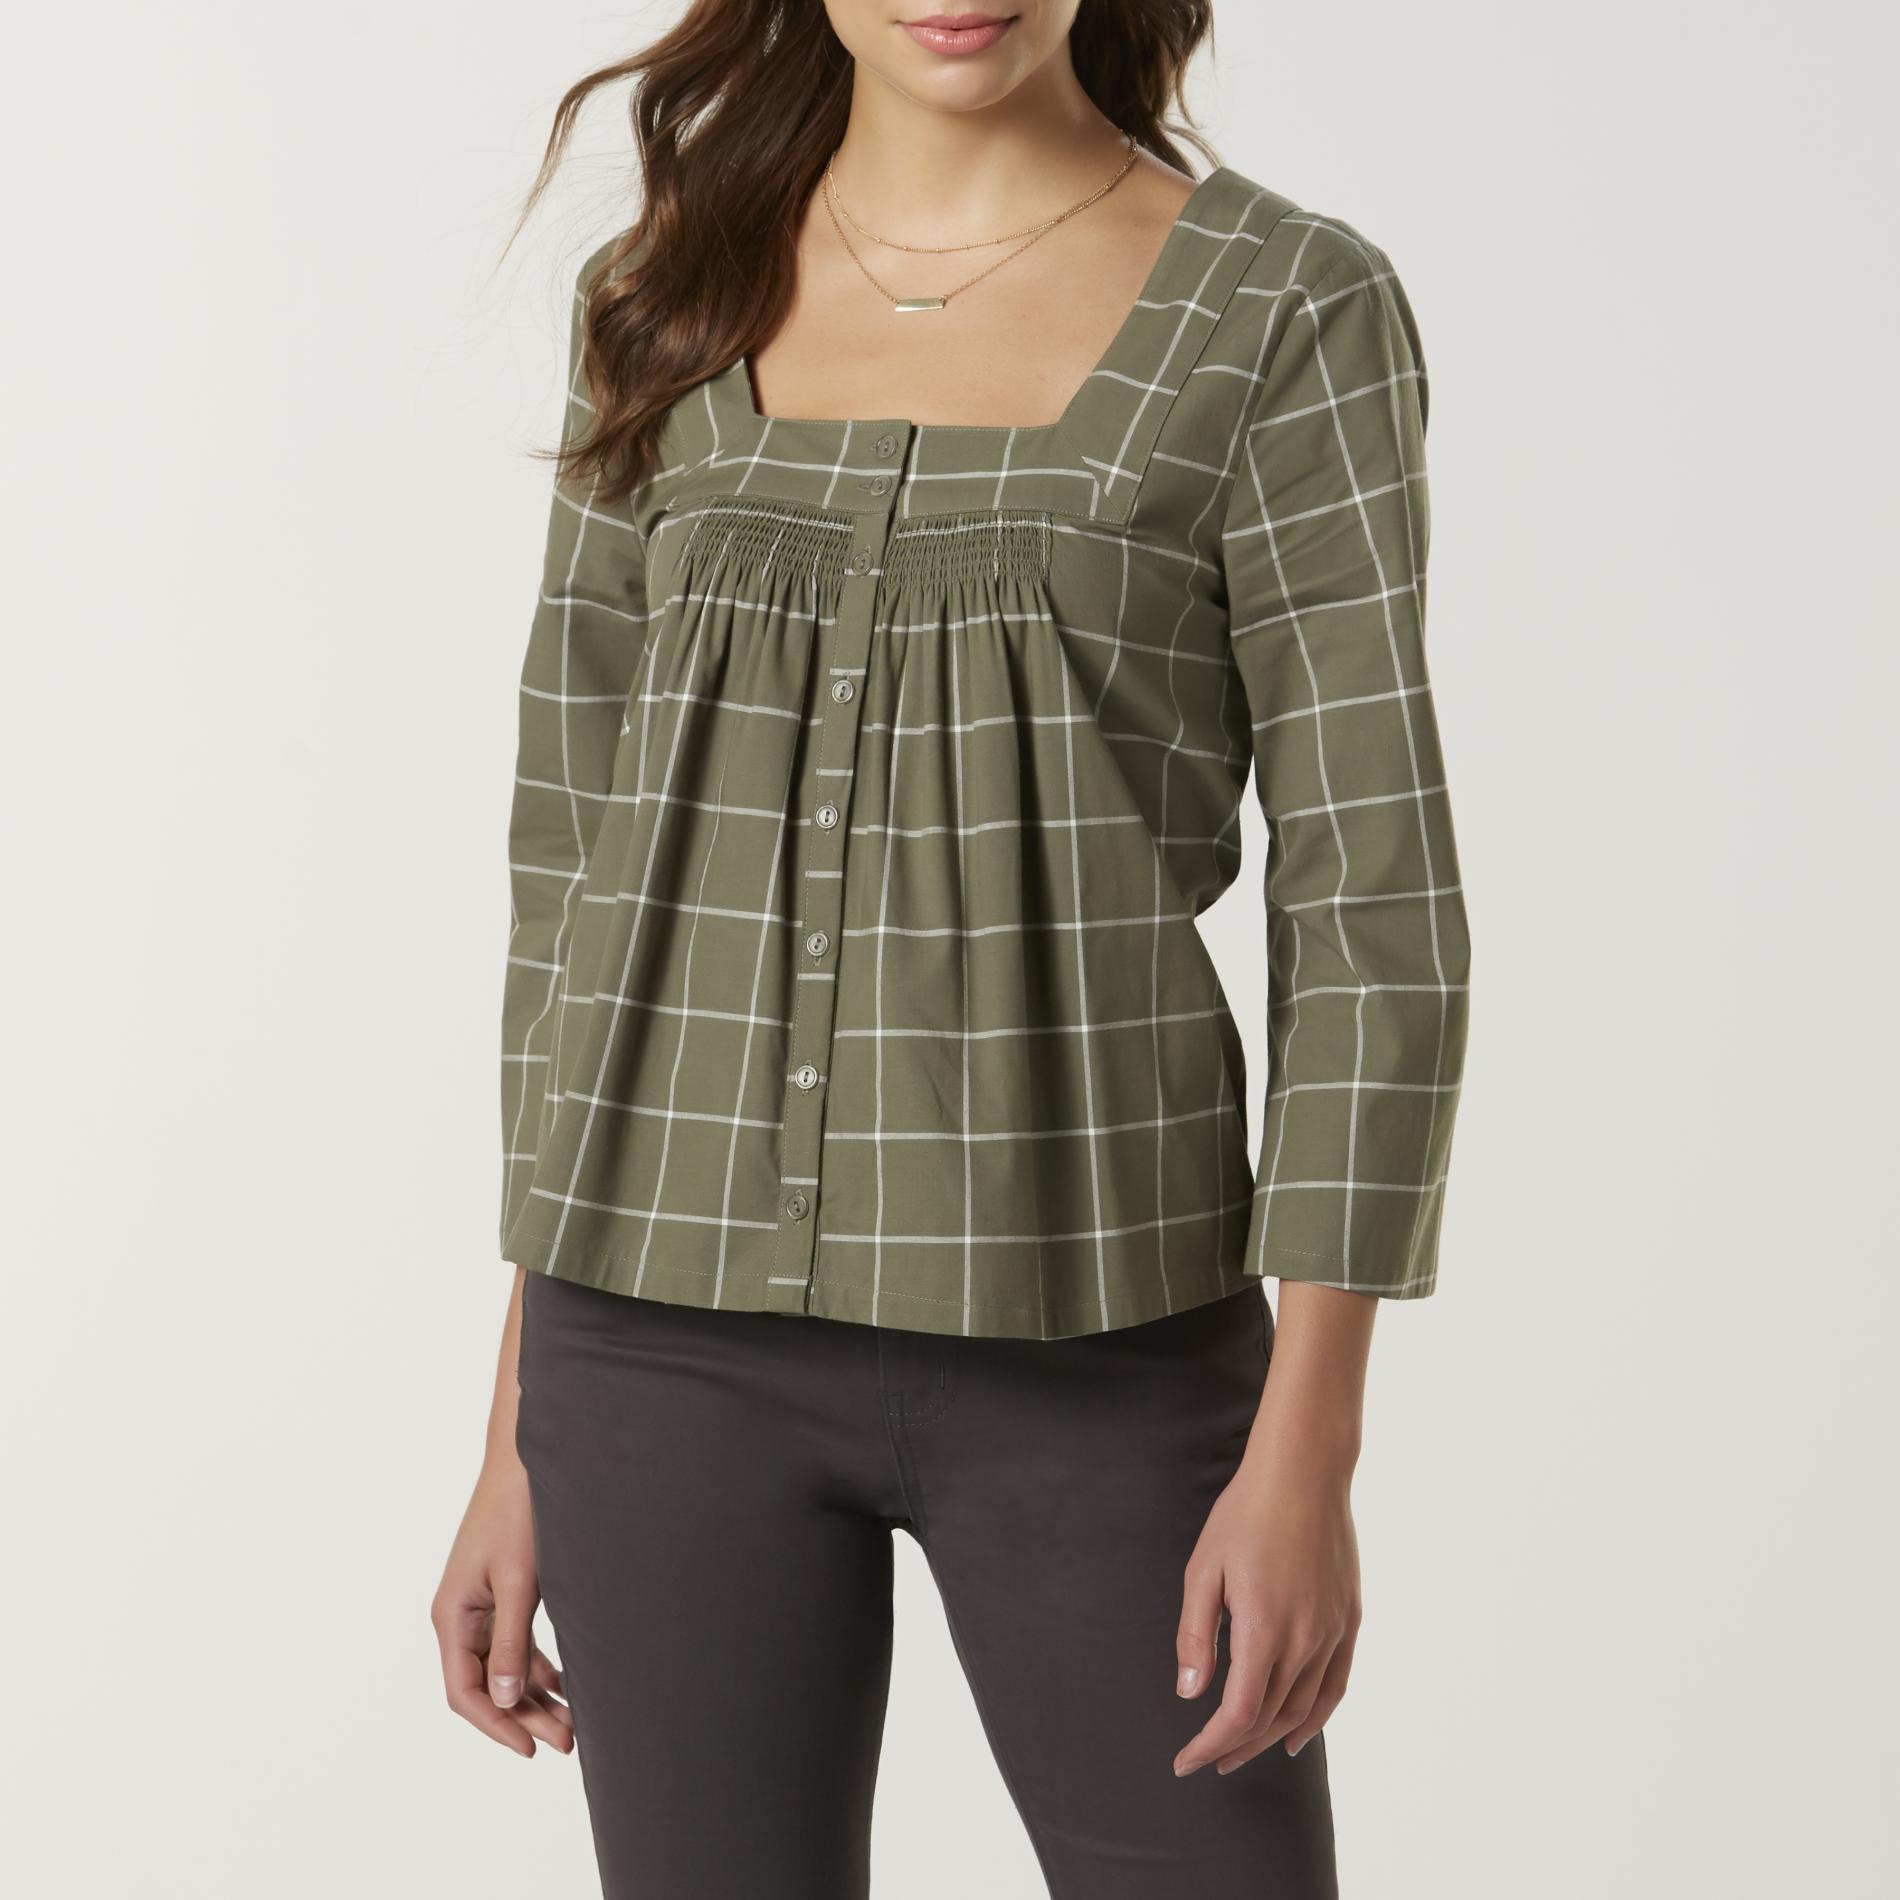 Route 66 Women's Square Neck Blouse - Checkered